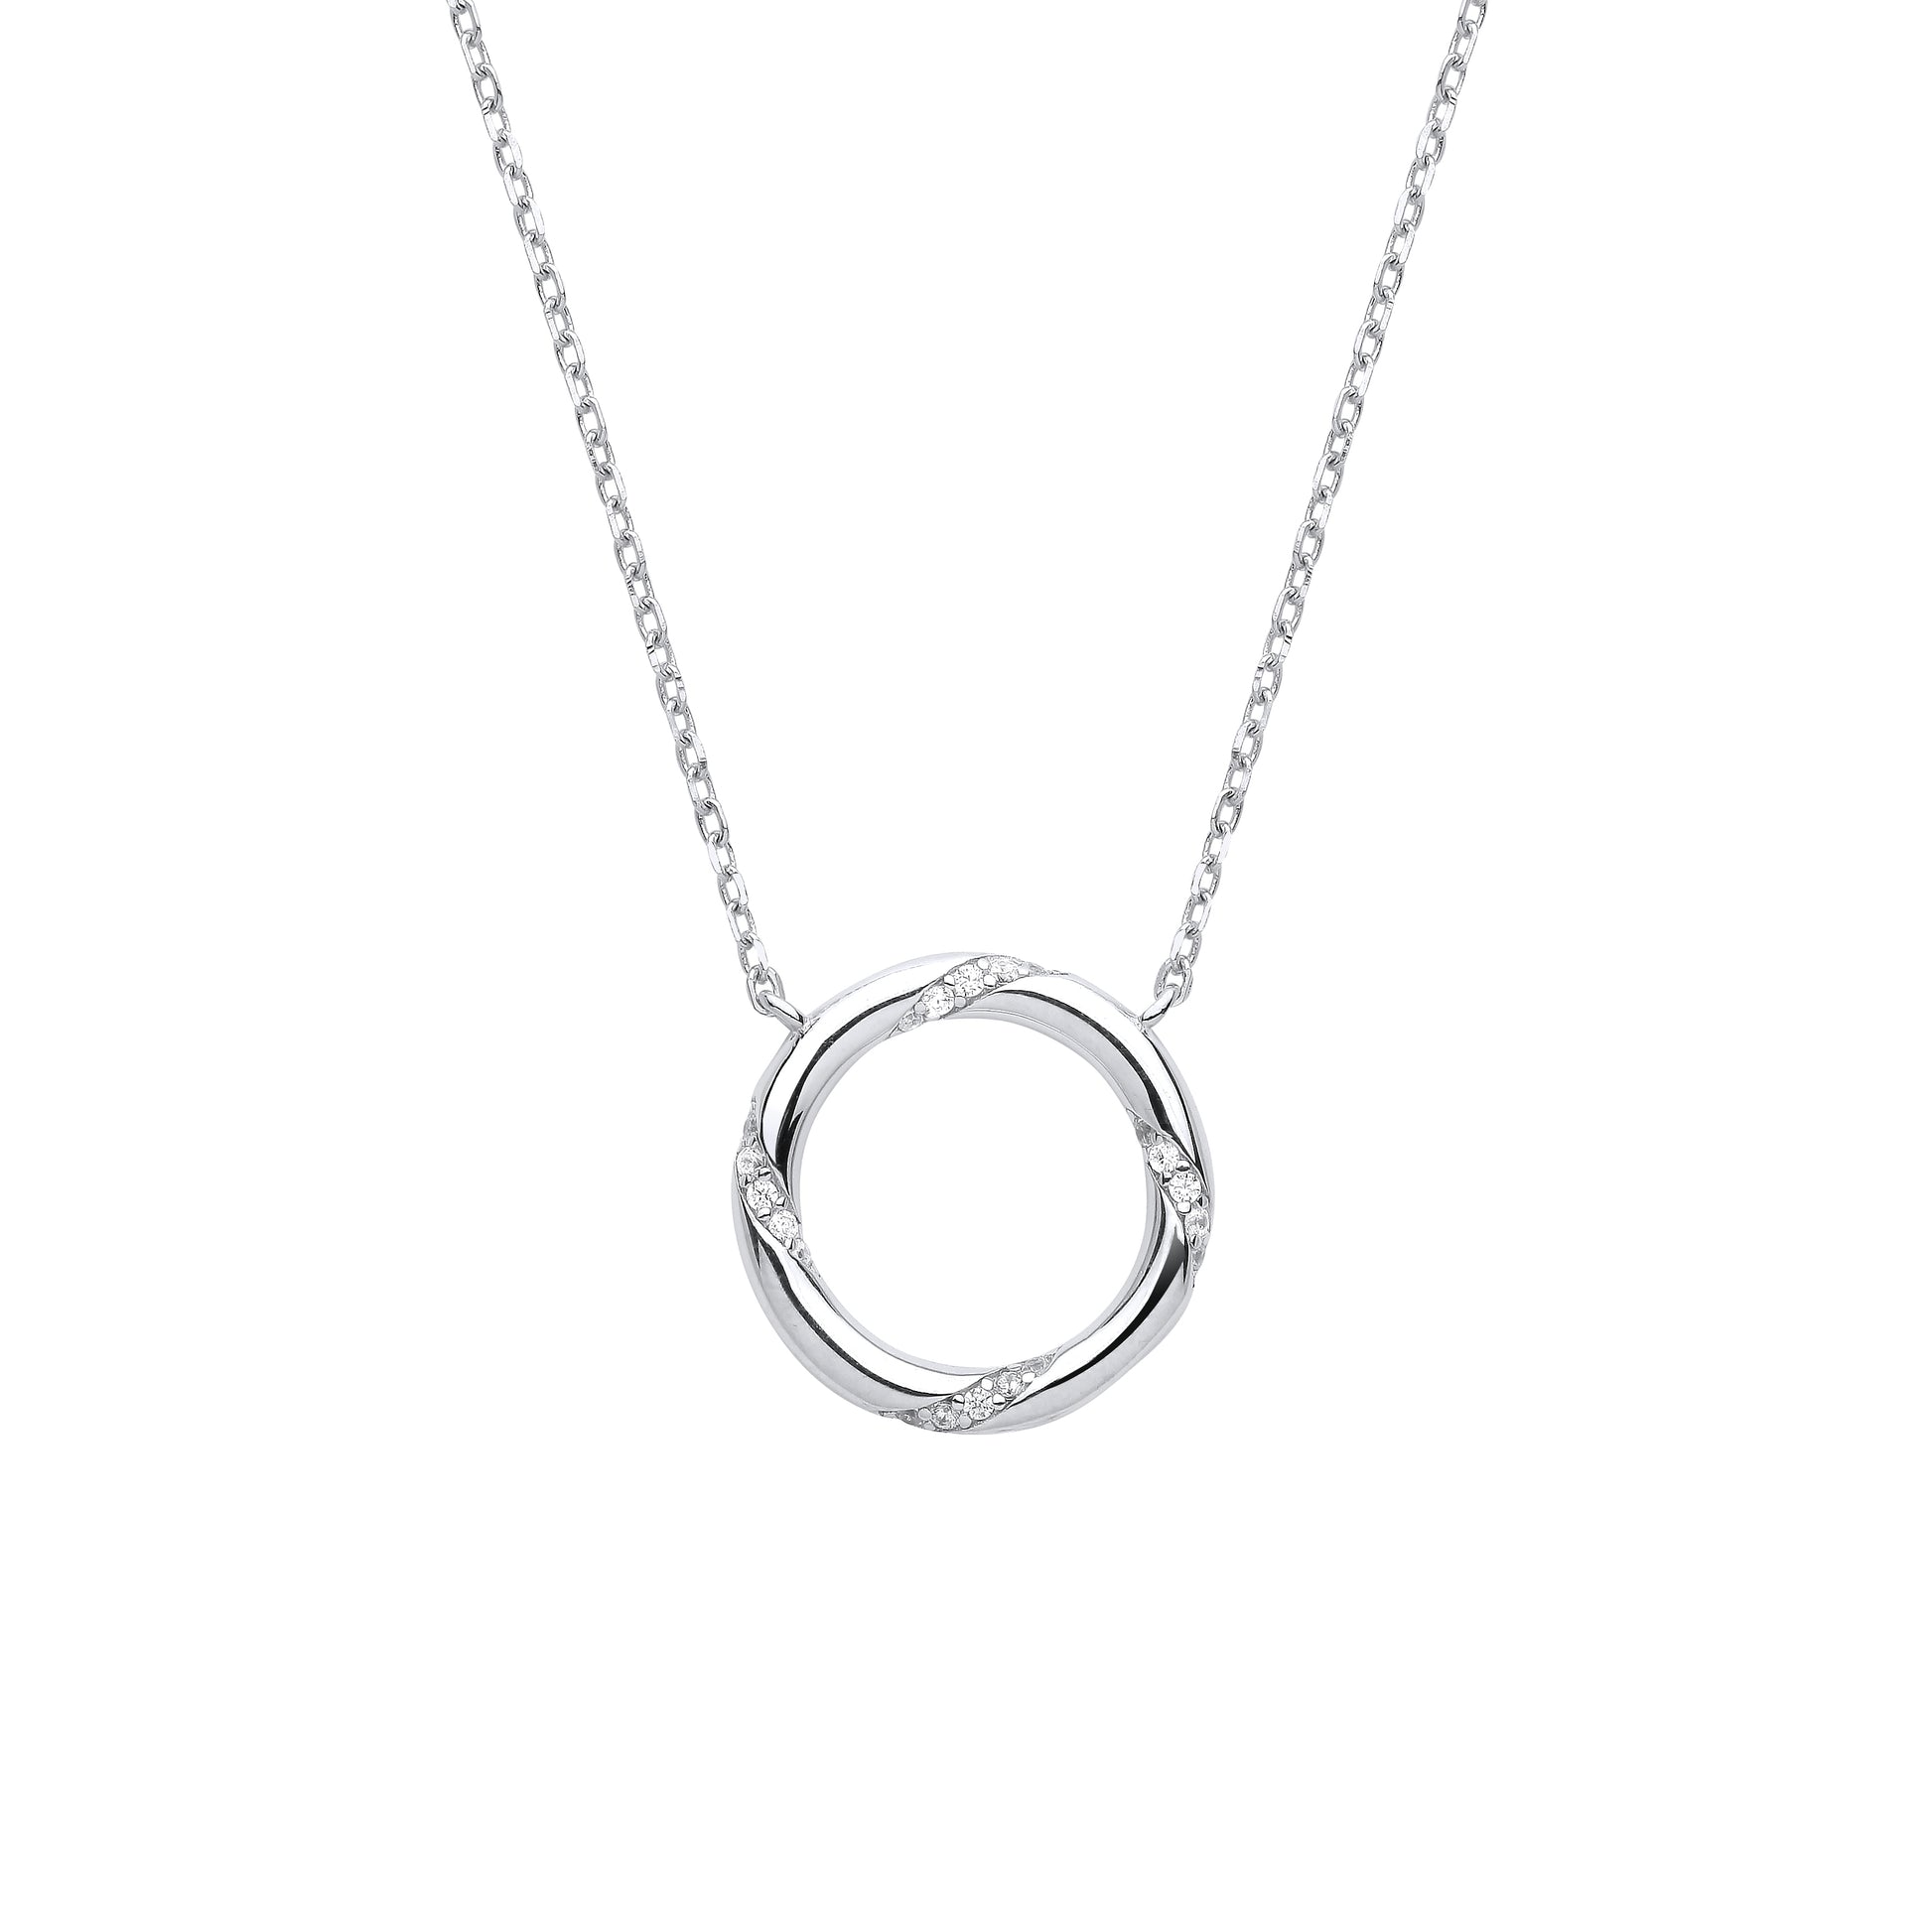 Silver  Twisting Meander Circle Lavalier Necklace - GVK374